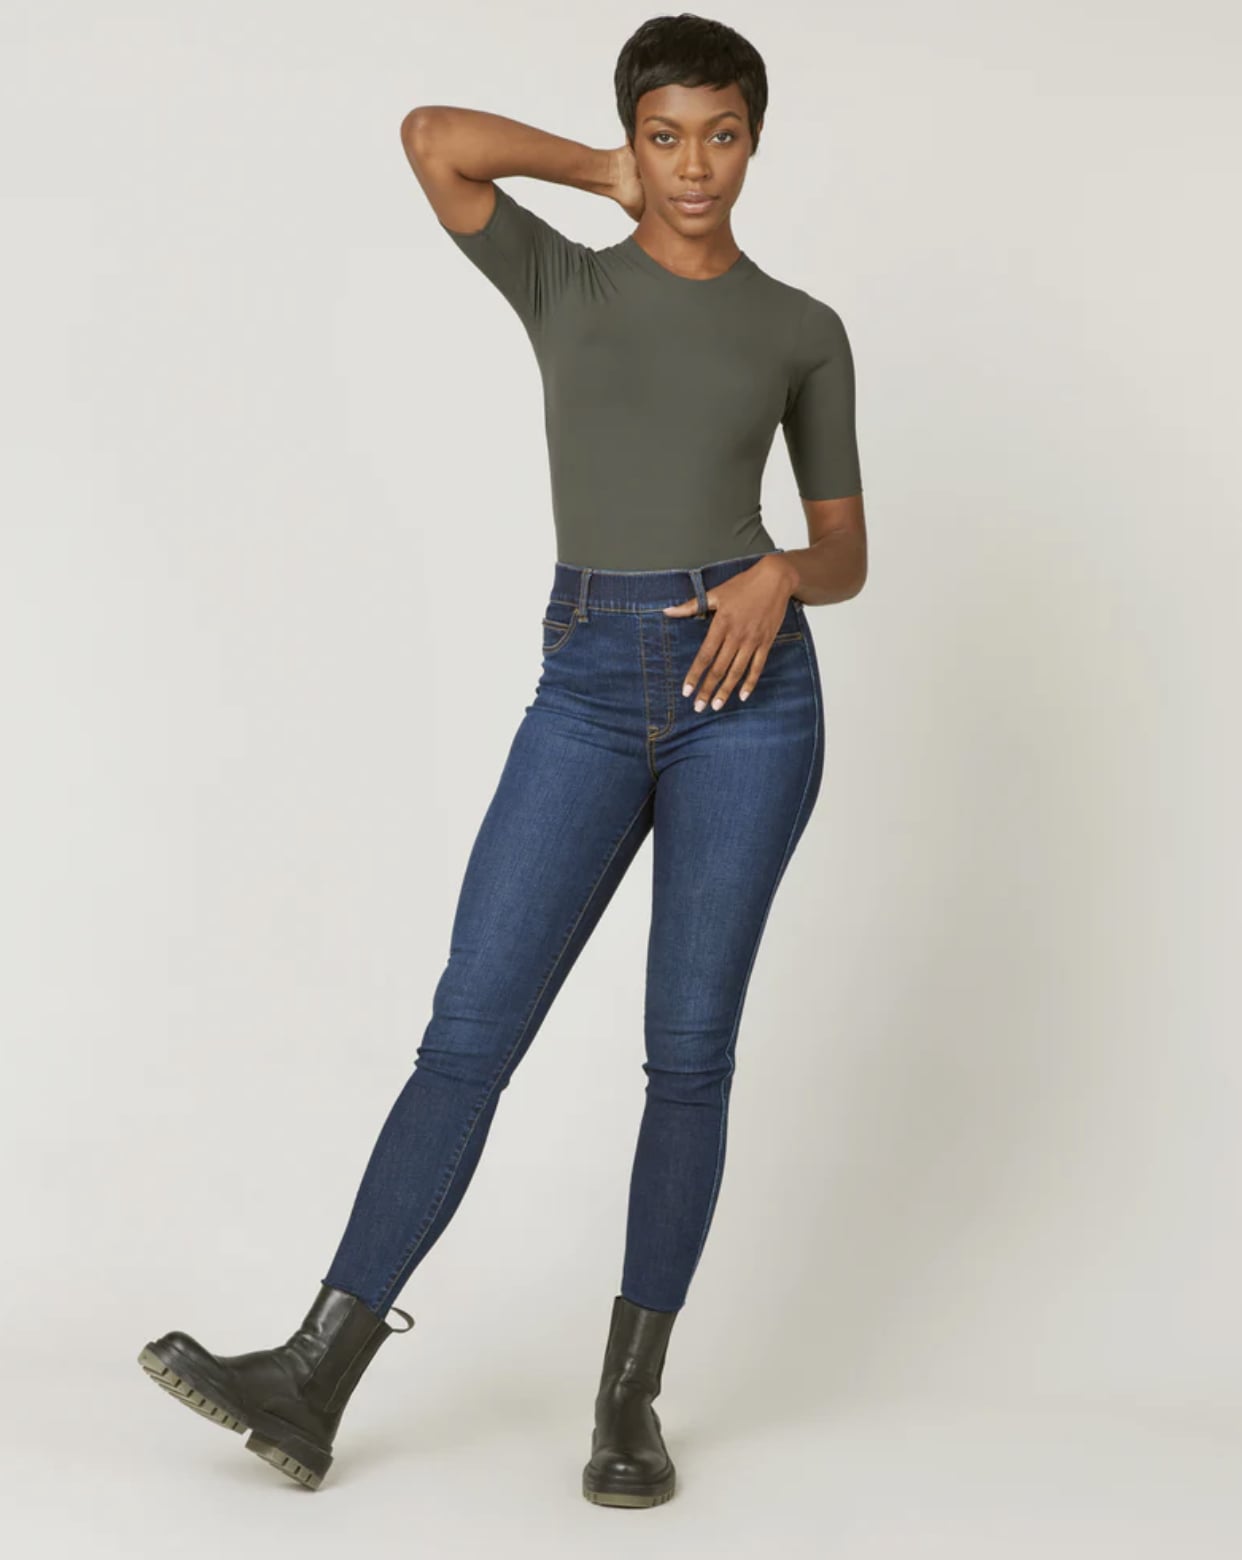 Best Ribbed Bodysuit: Spanx Suit Yourself Ribbed Crew Neck Bodysuit, 14  Bodysuits That Will Make Fall Layering a Breeze